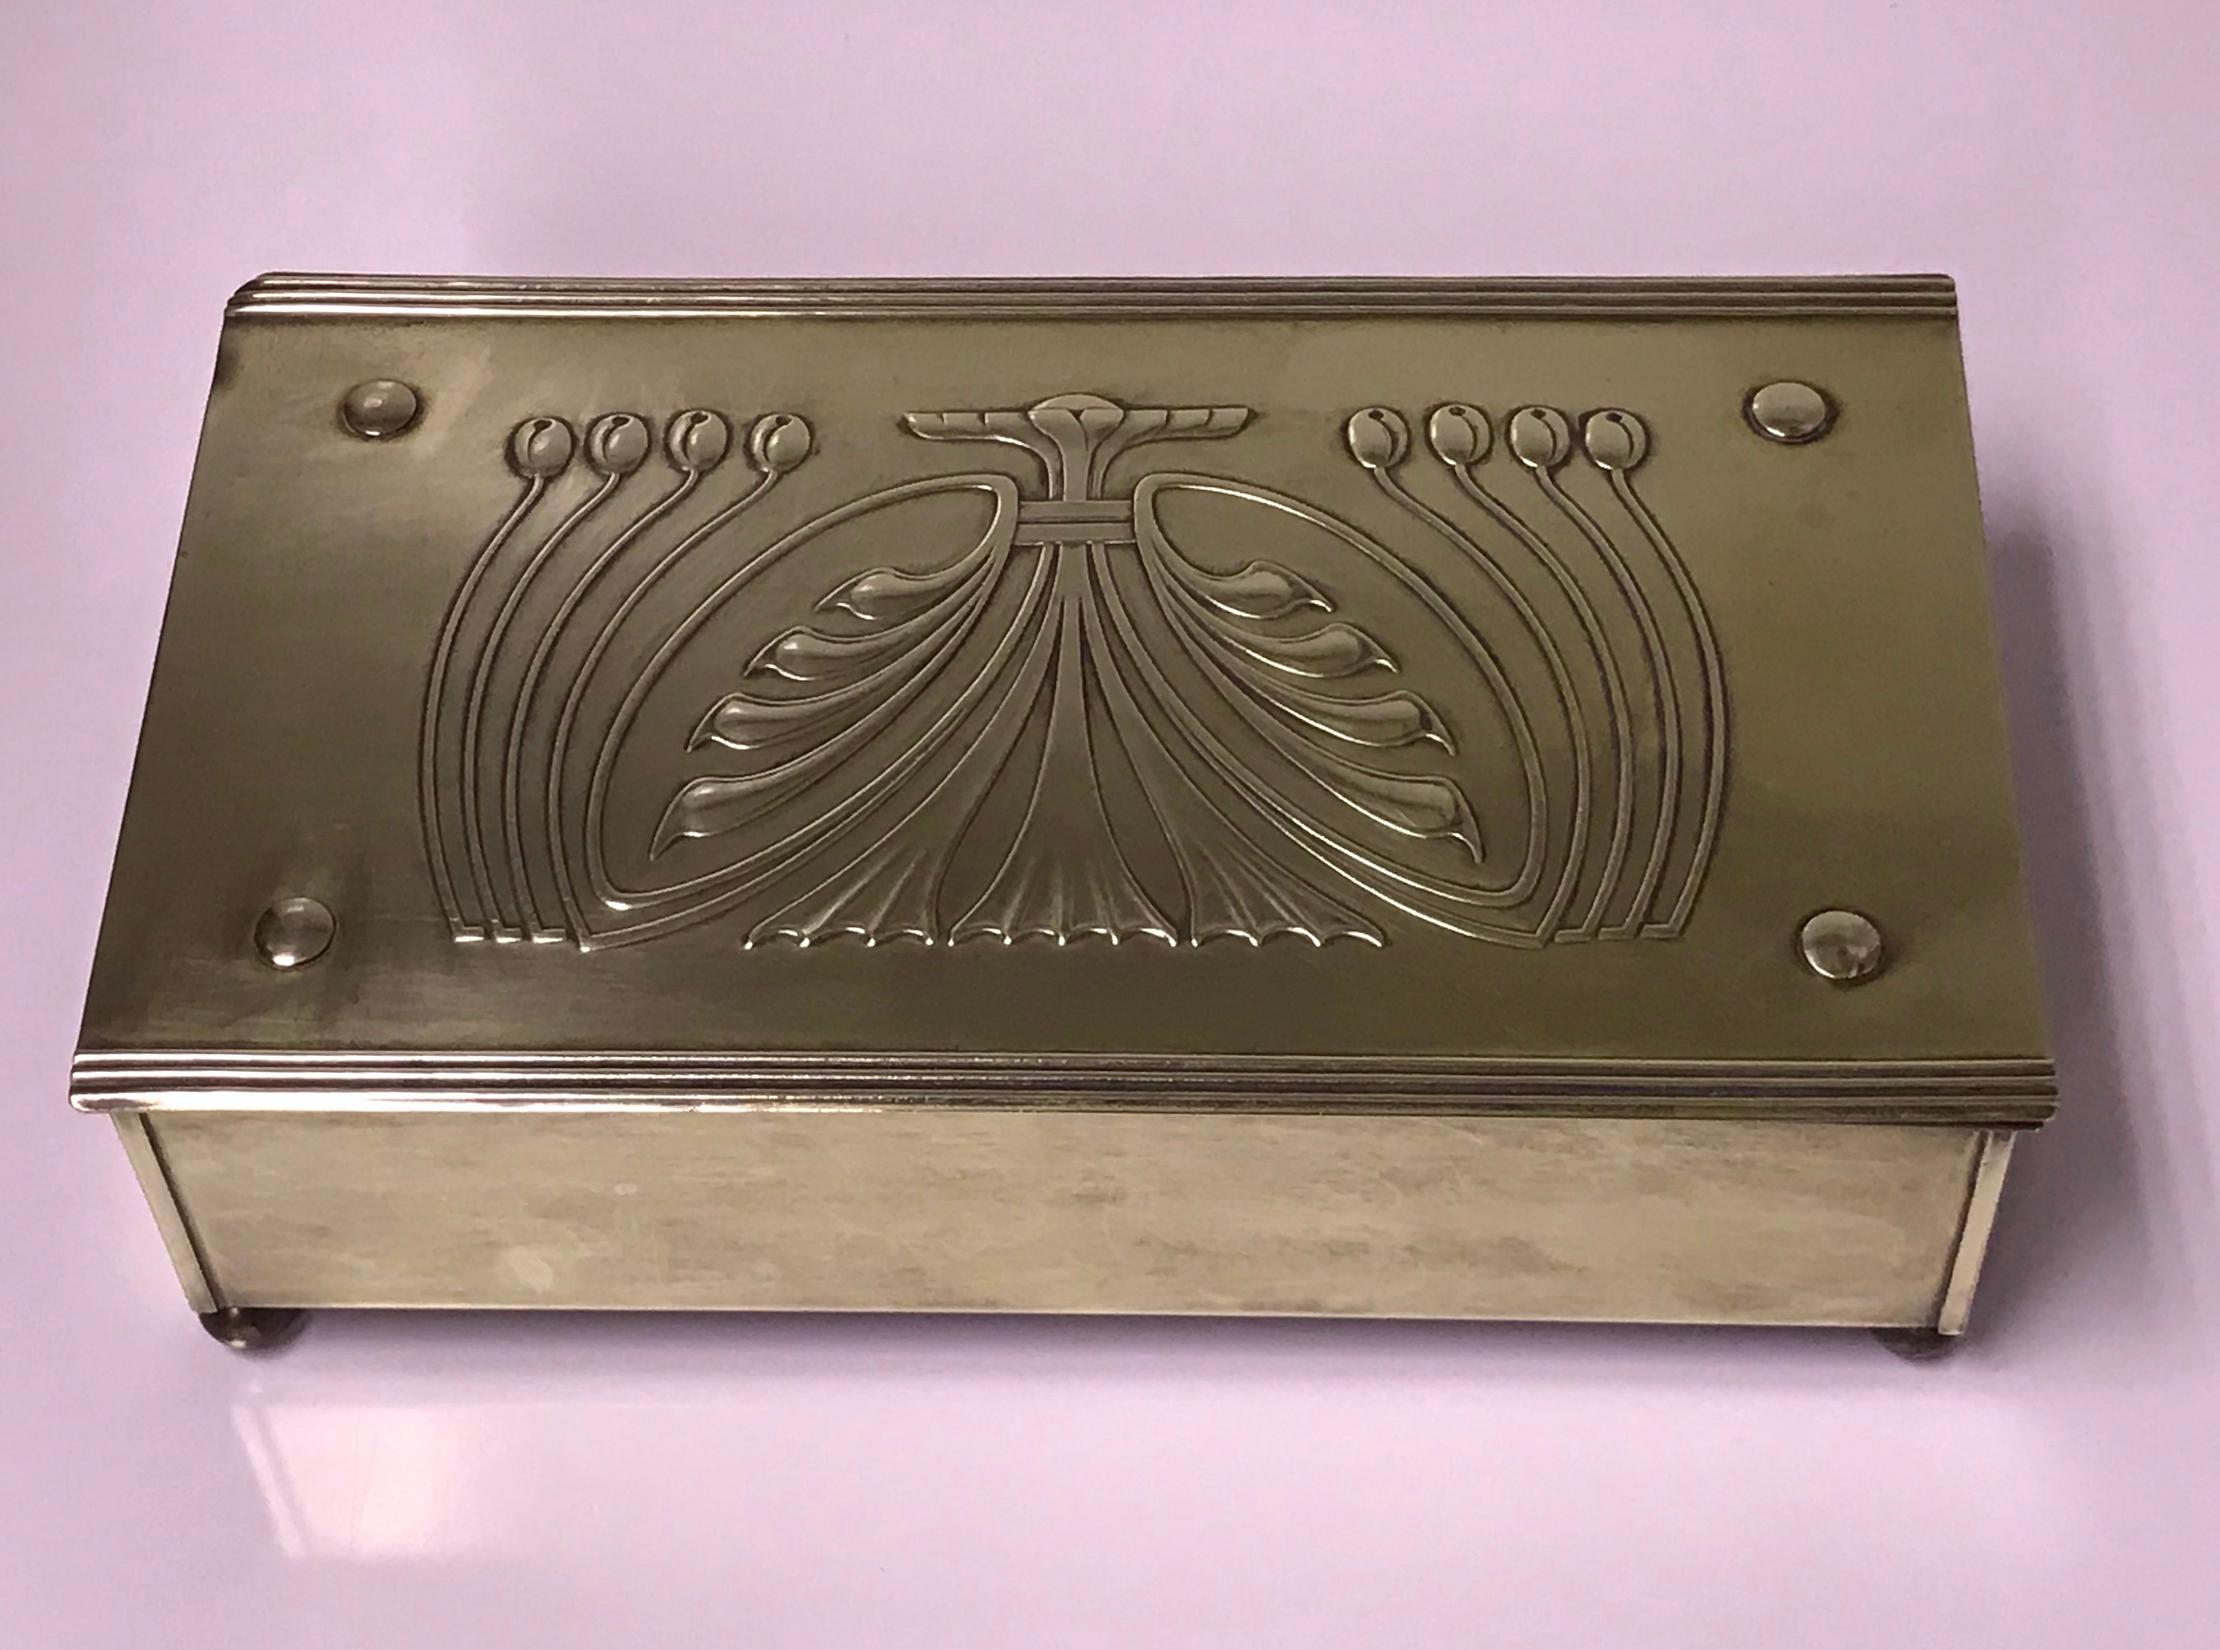 Jugendstil Nouveau secessionist brass box, Carl Deffner Germany, circa 1910. The large rectangular box on four bun supports, stylized foliate hinged cover, plain sides. Cedar lined interior. CDE mark on underside. Measures: 9.125 x 5.25 x 2.60